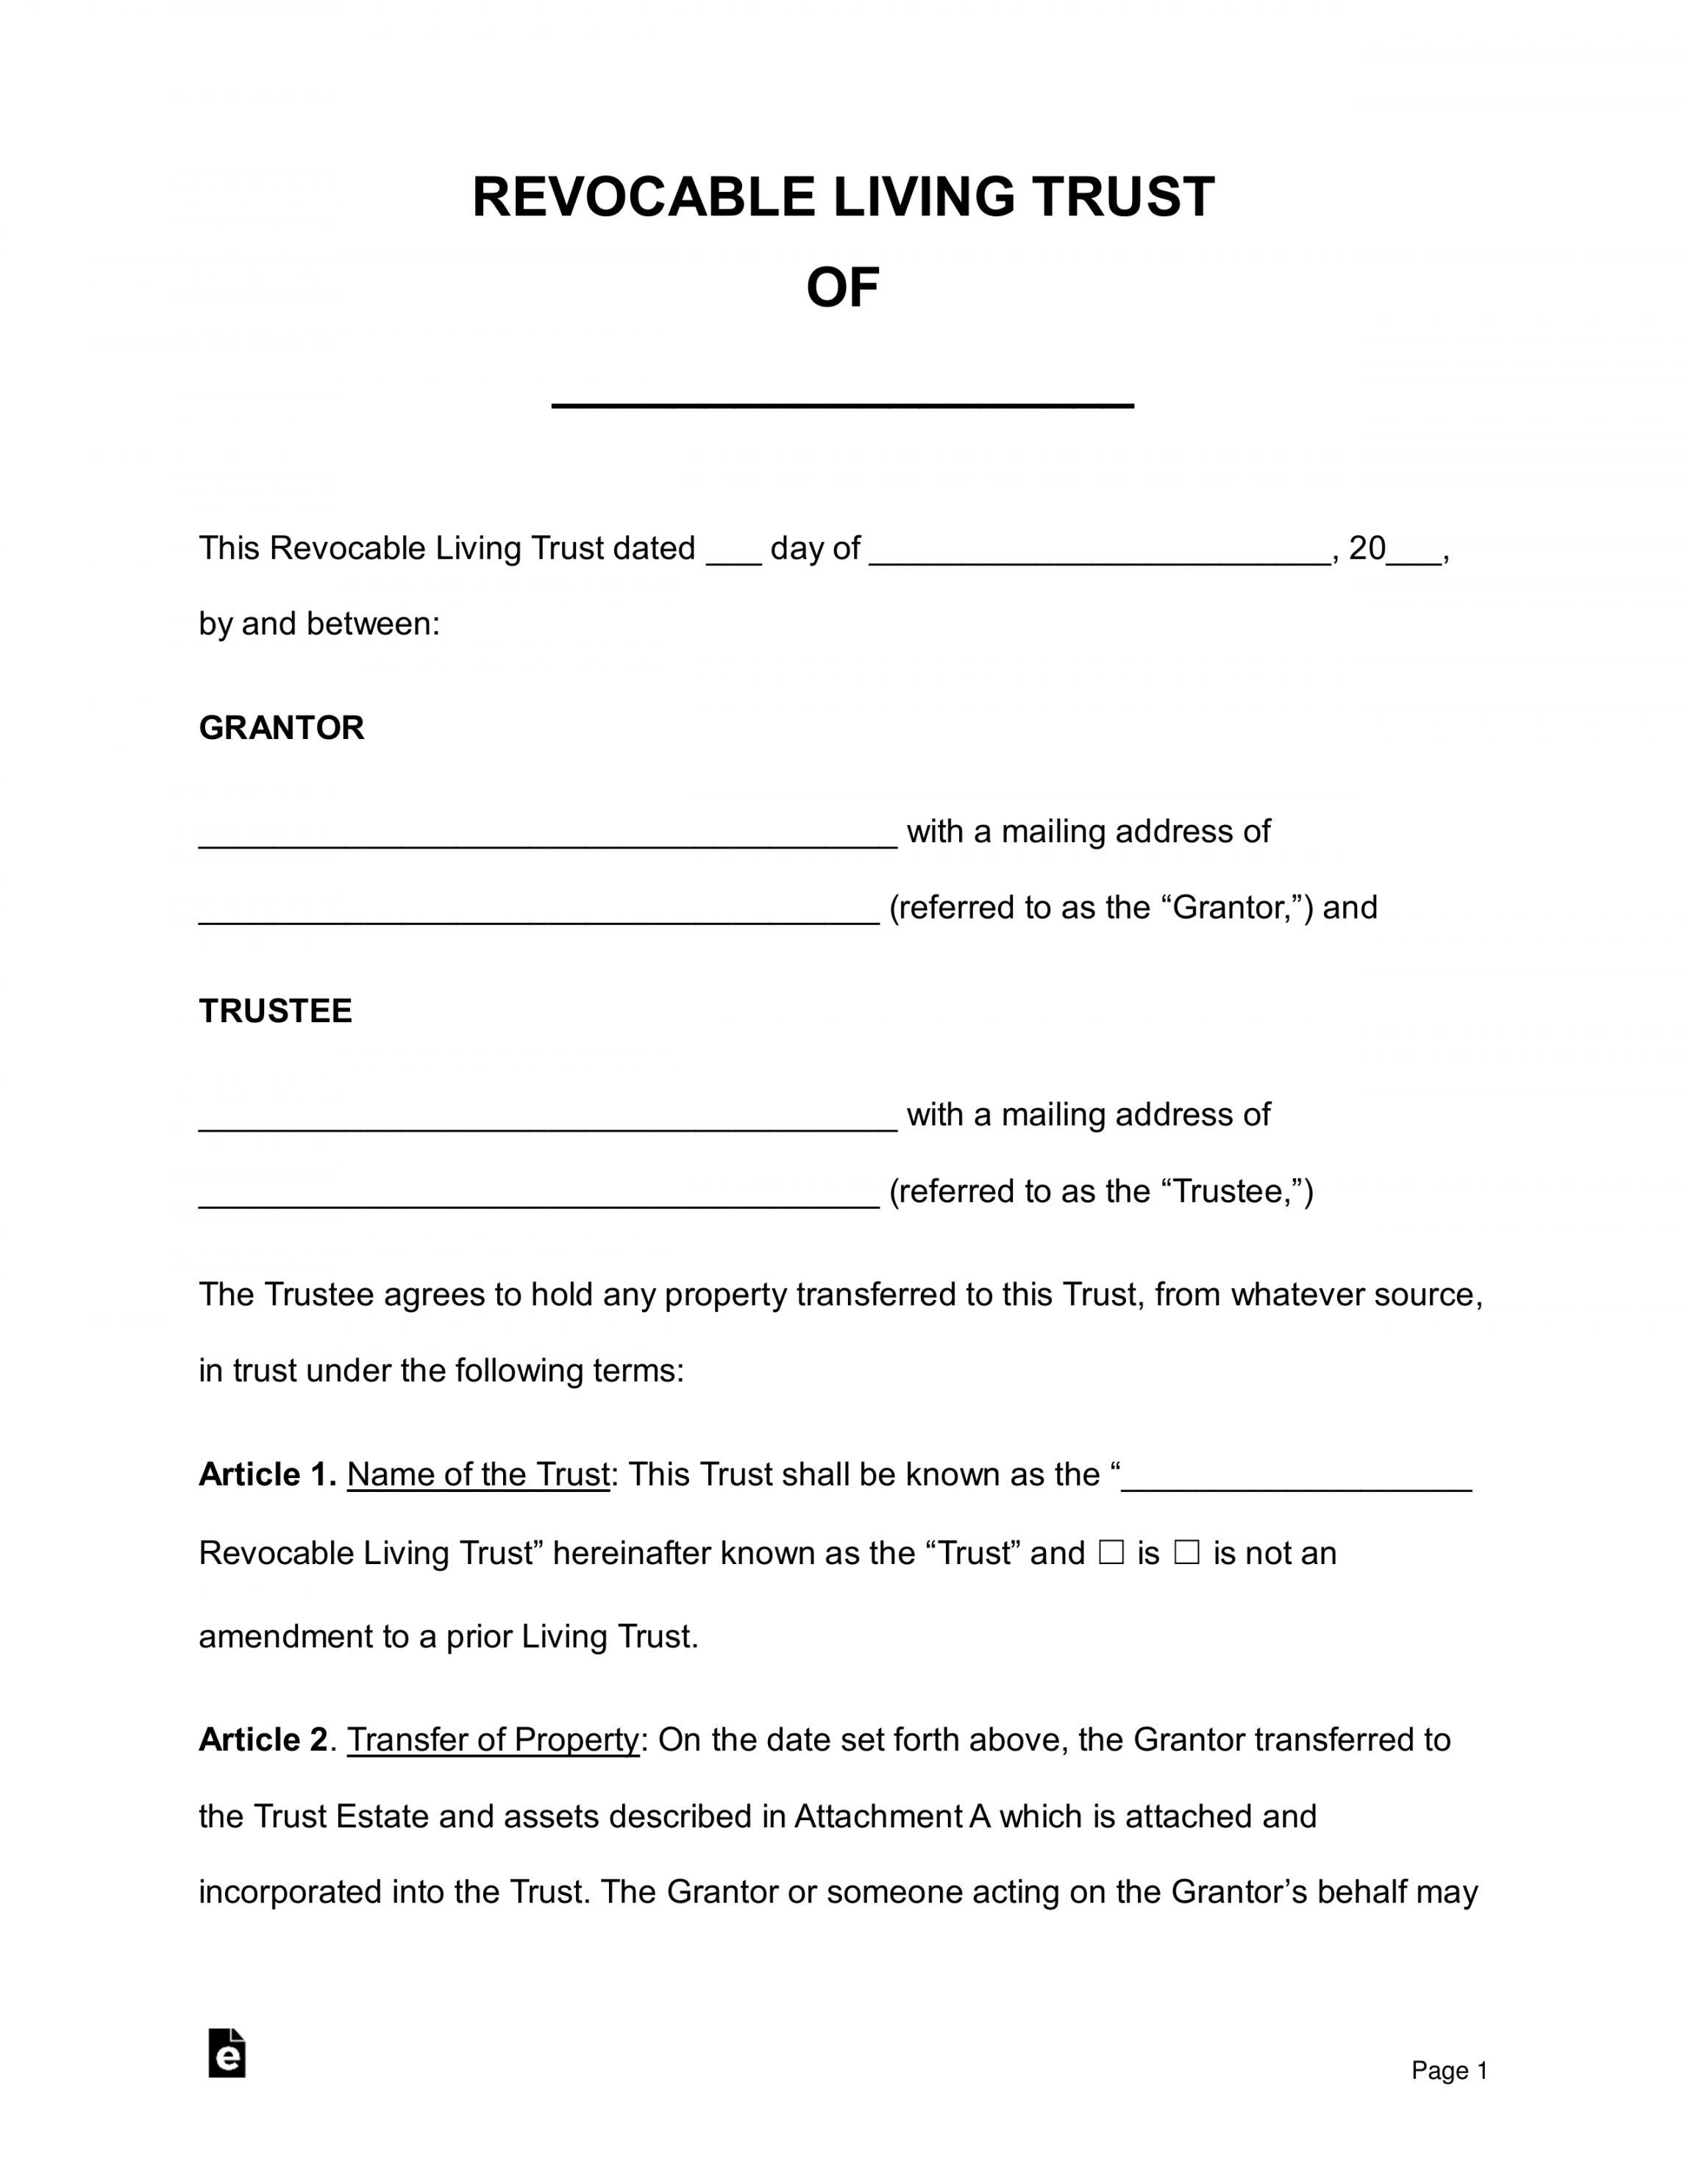 Free Revocable Living Trust Forms - PDF  Word – eForms - FREE Printables - Free Printable Living Trust Forms